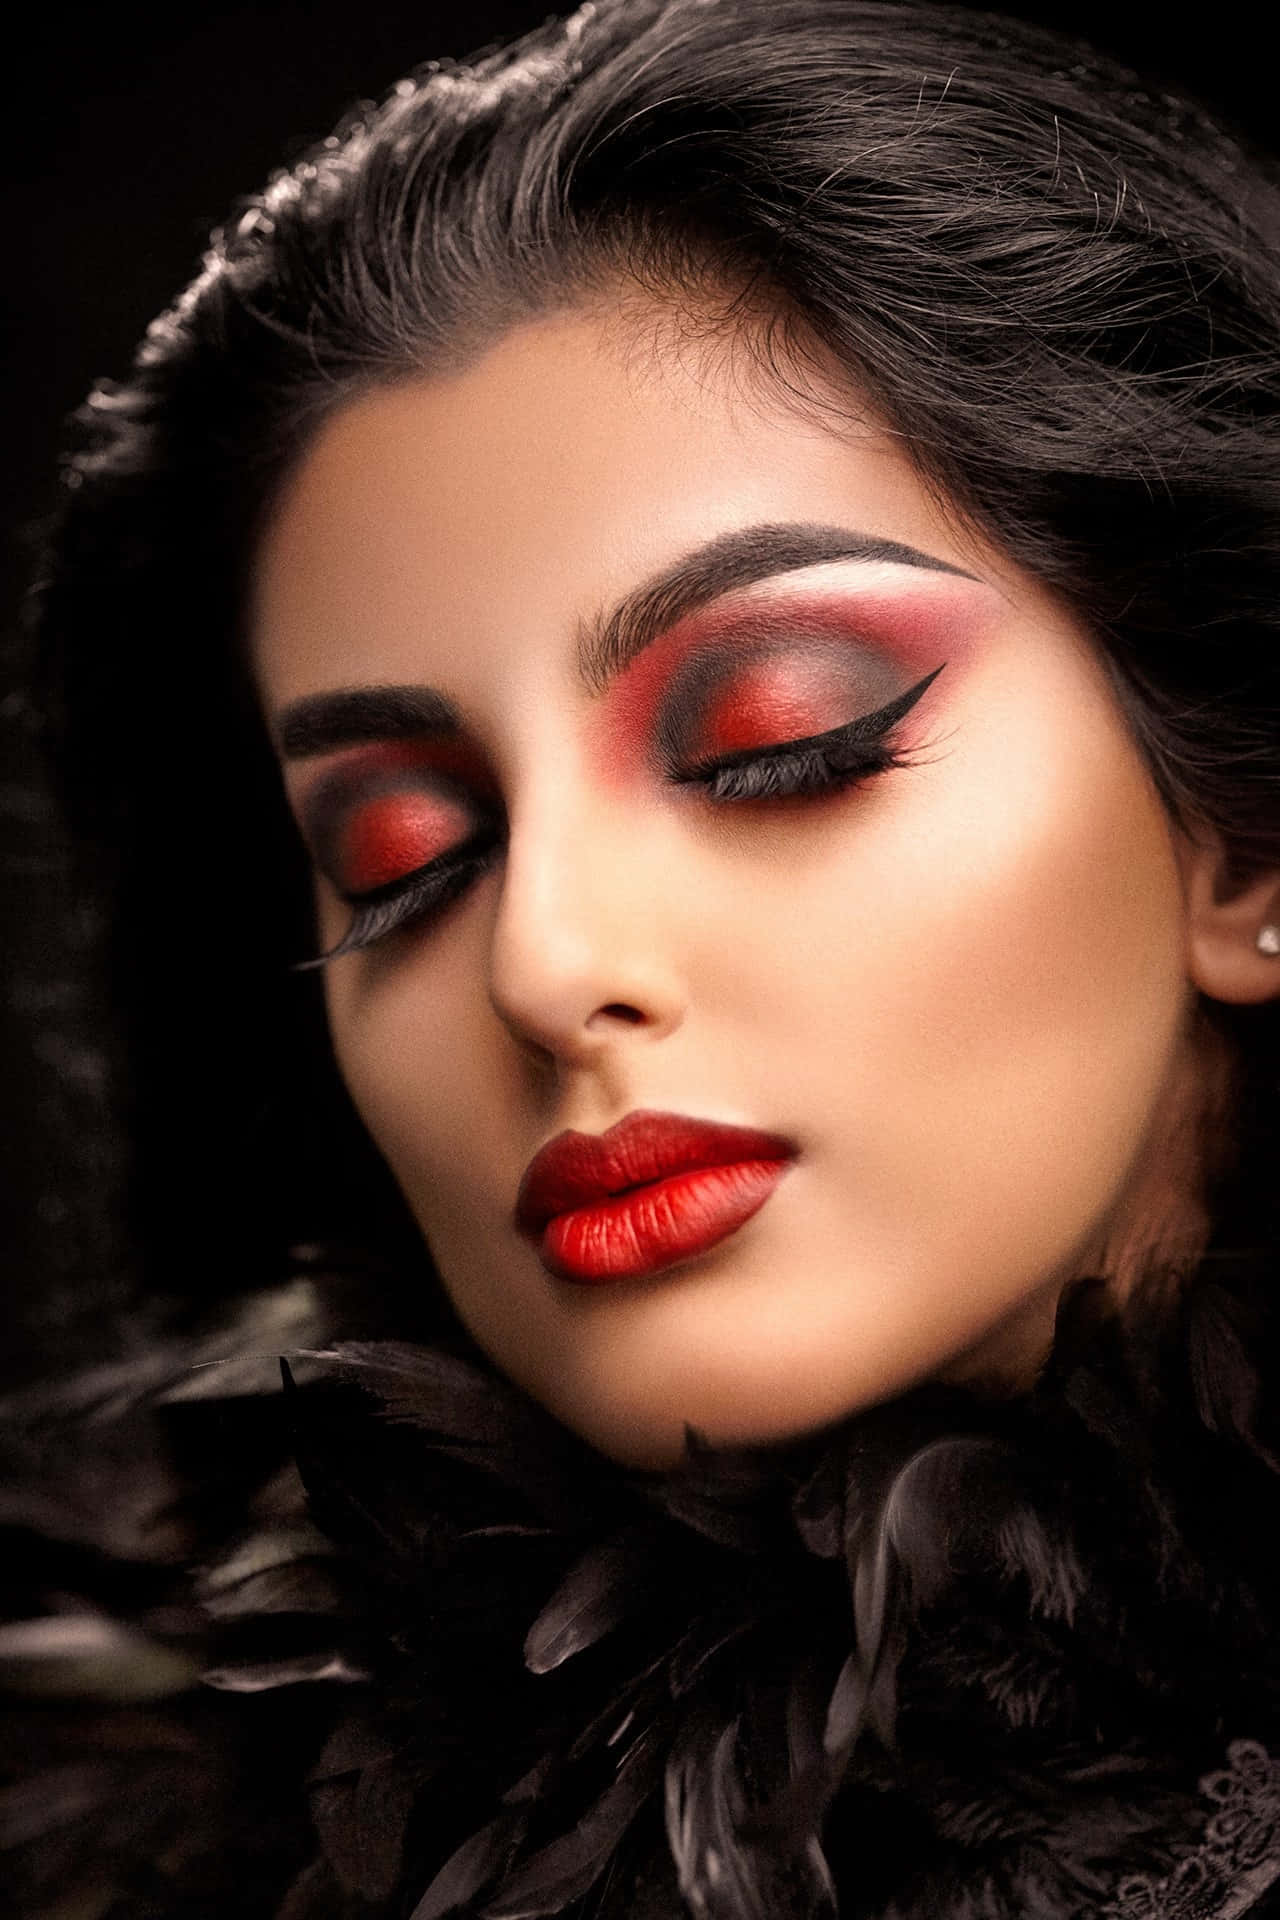 "Express yourself this Halloween with stunning makeup looks." Wallpaper